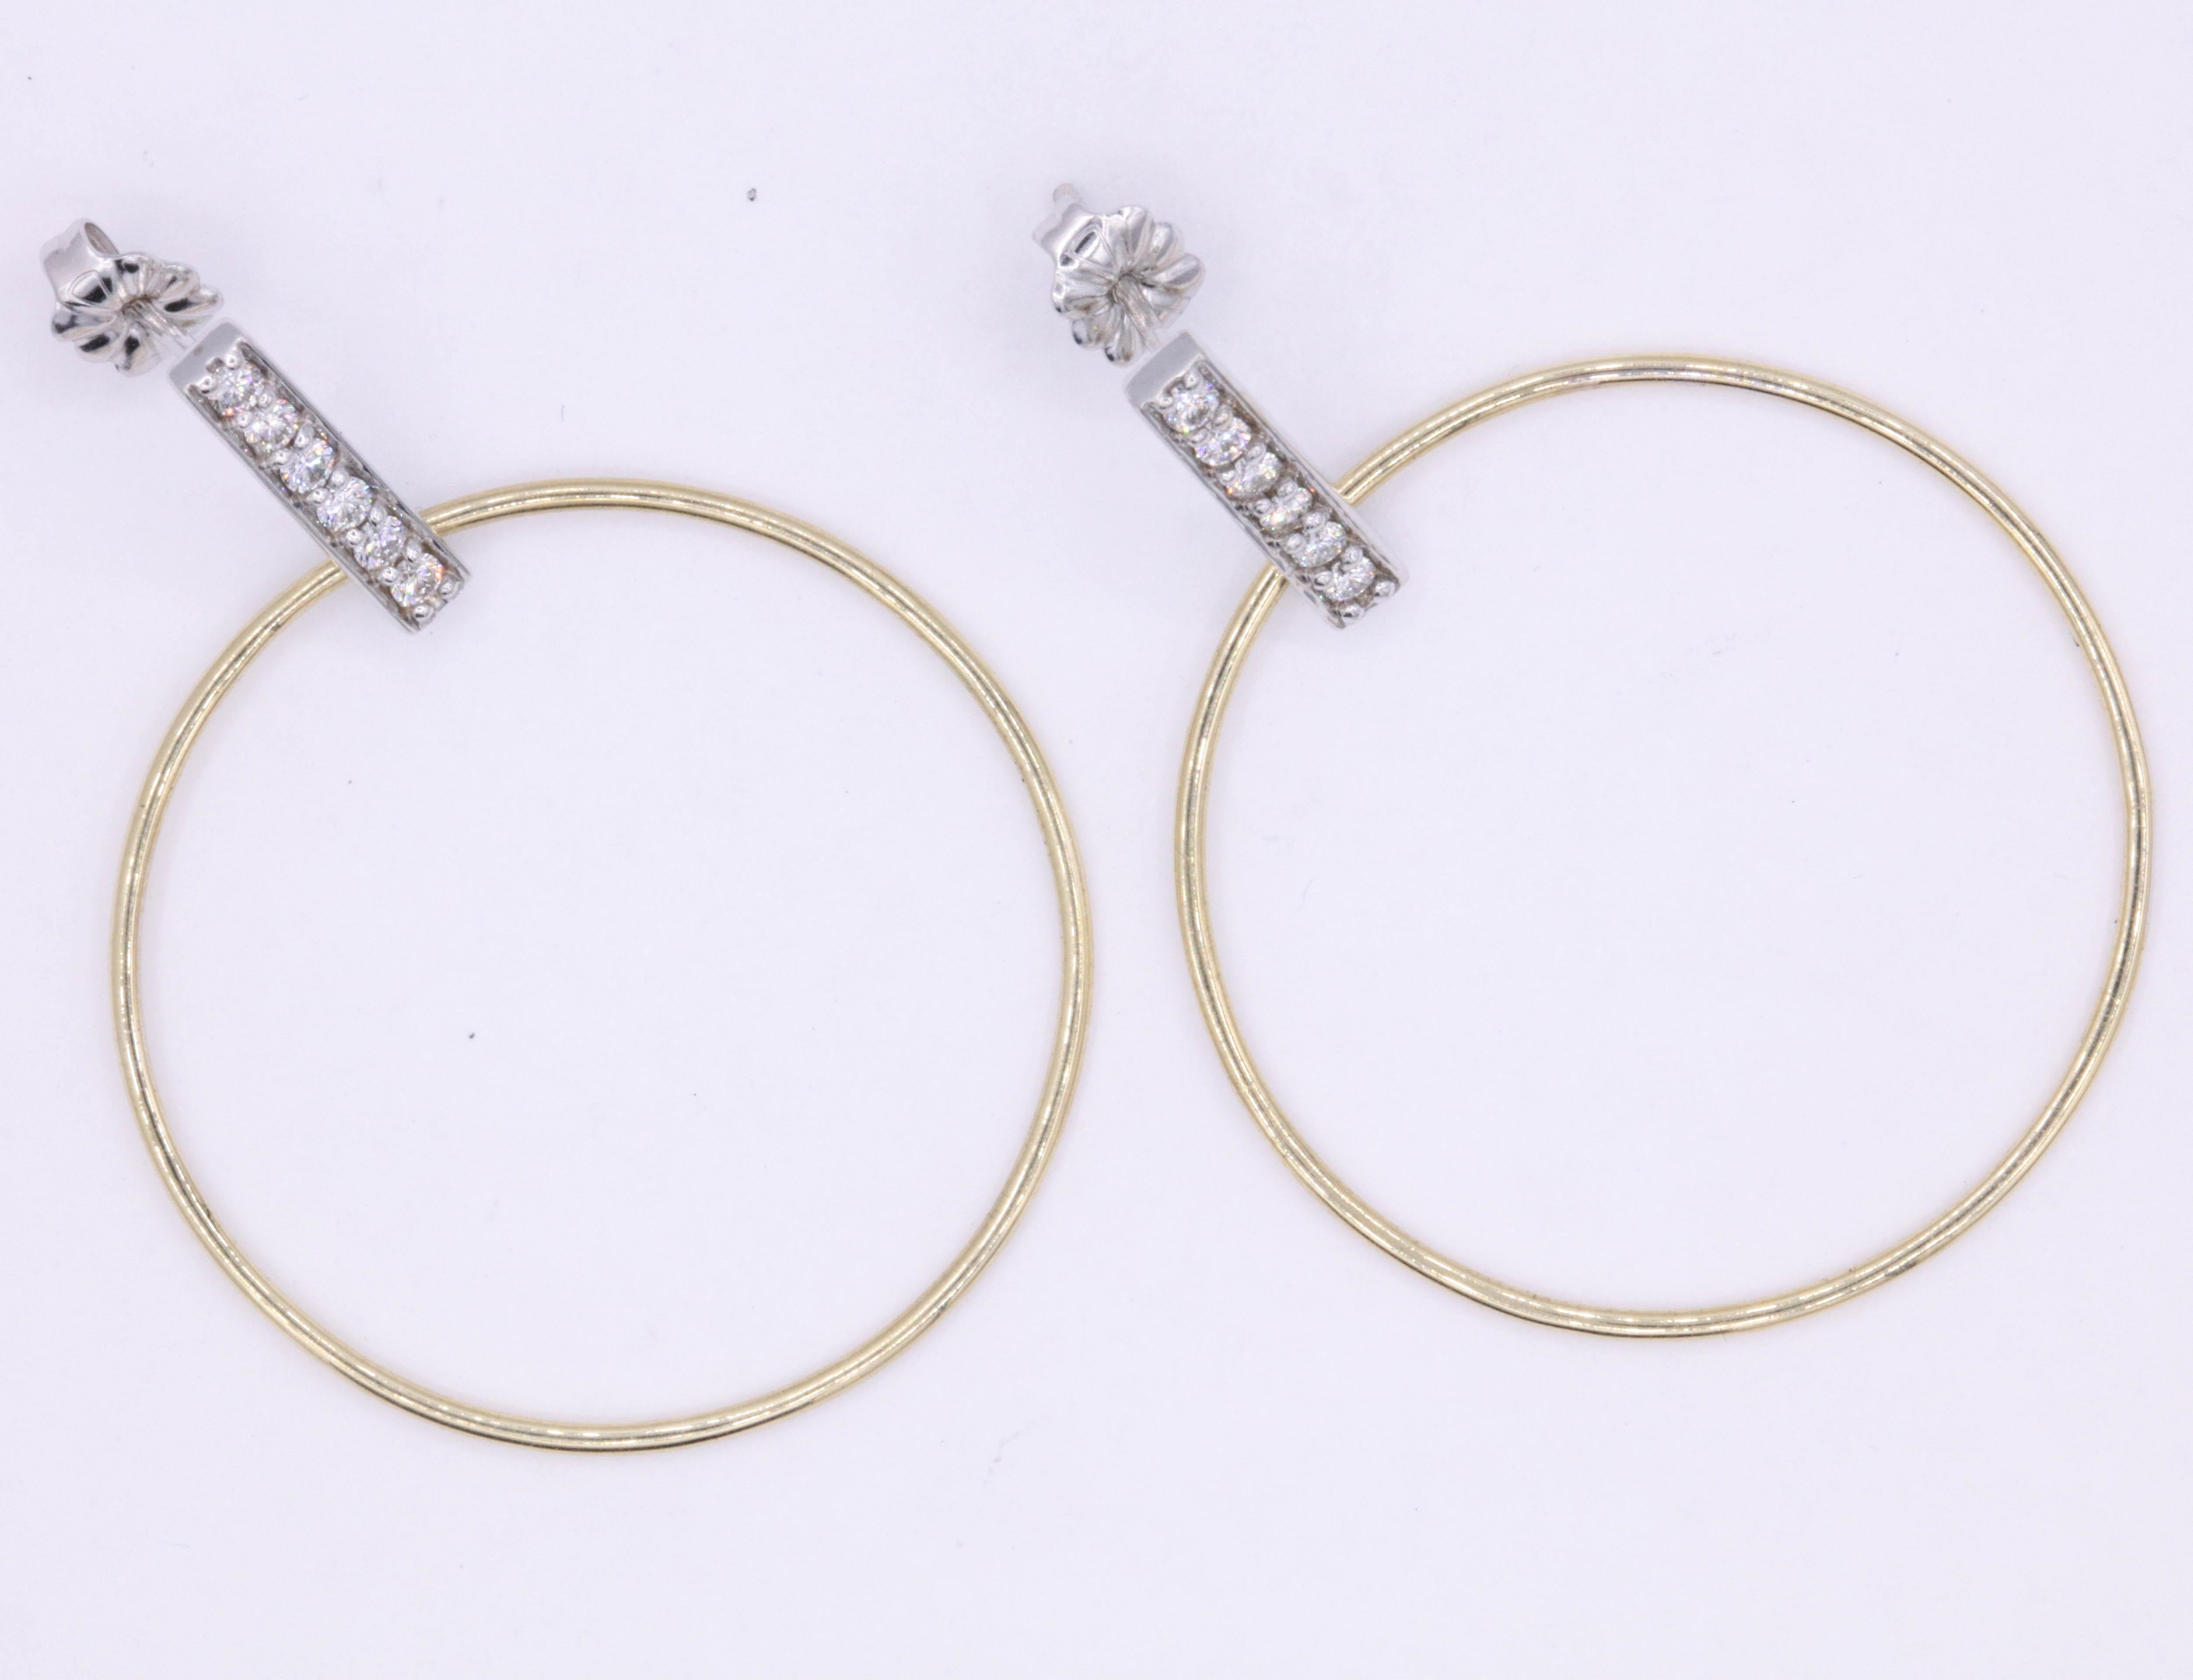 These fun and playful hoop earrings feature a diamond bar with 12 round brilliants weighing 0.33 carats, in 14k white and yellow gold. 
Color: G-H
Clarity: SI